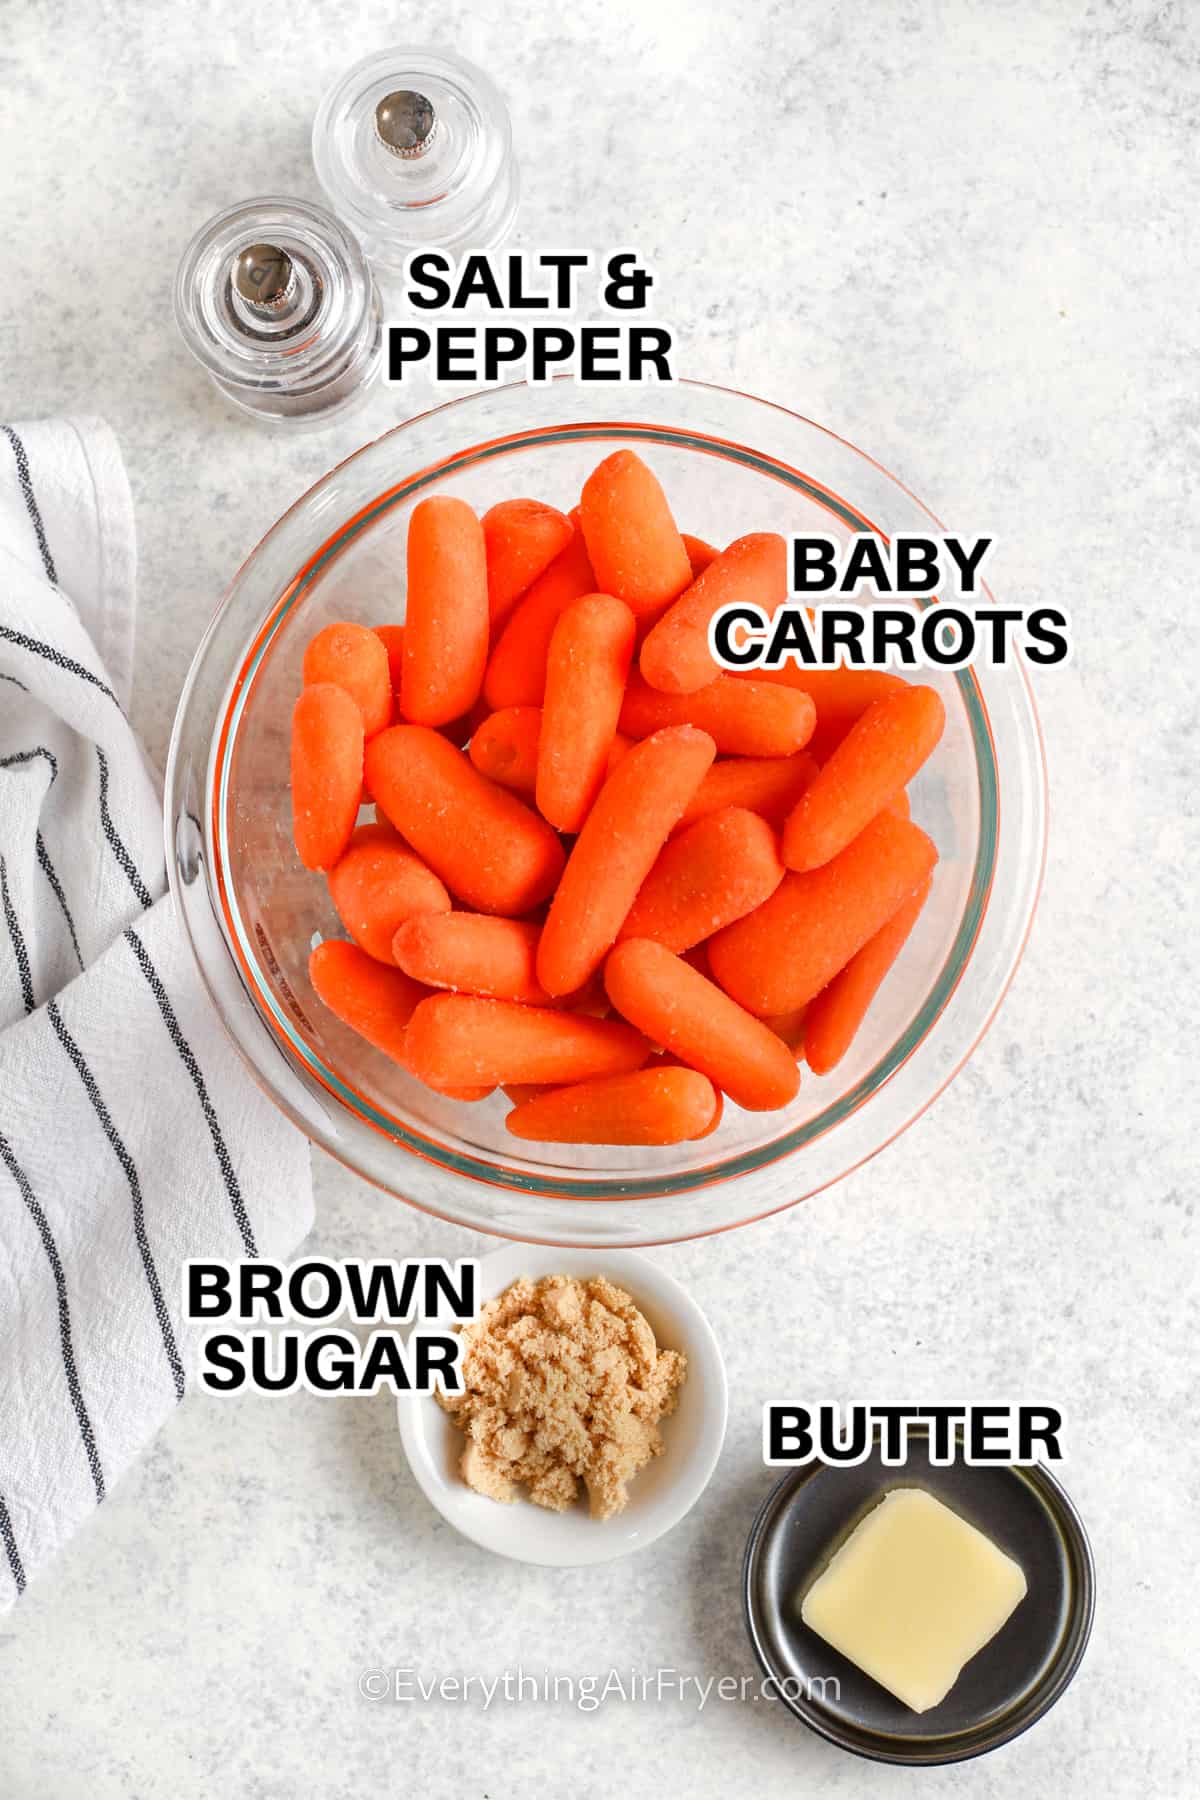 Ingredients to make Air Fryer Baby Carrots labeled: carrots, brown sugar, butter, salt and pepper